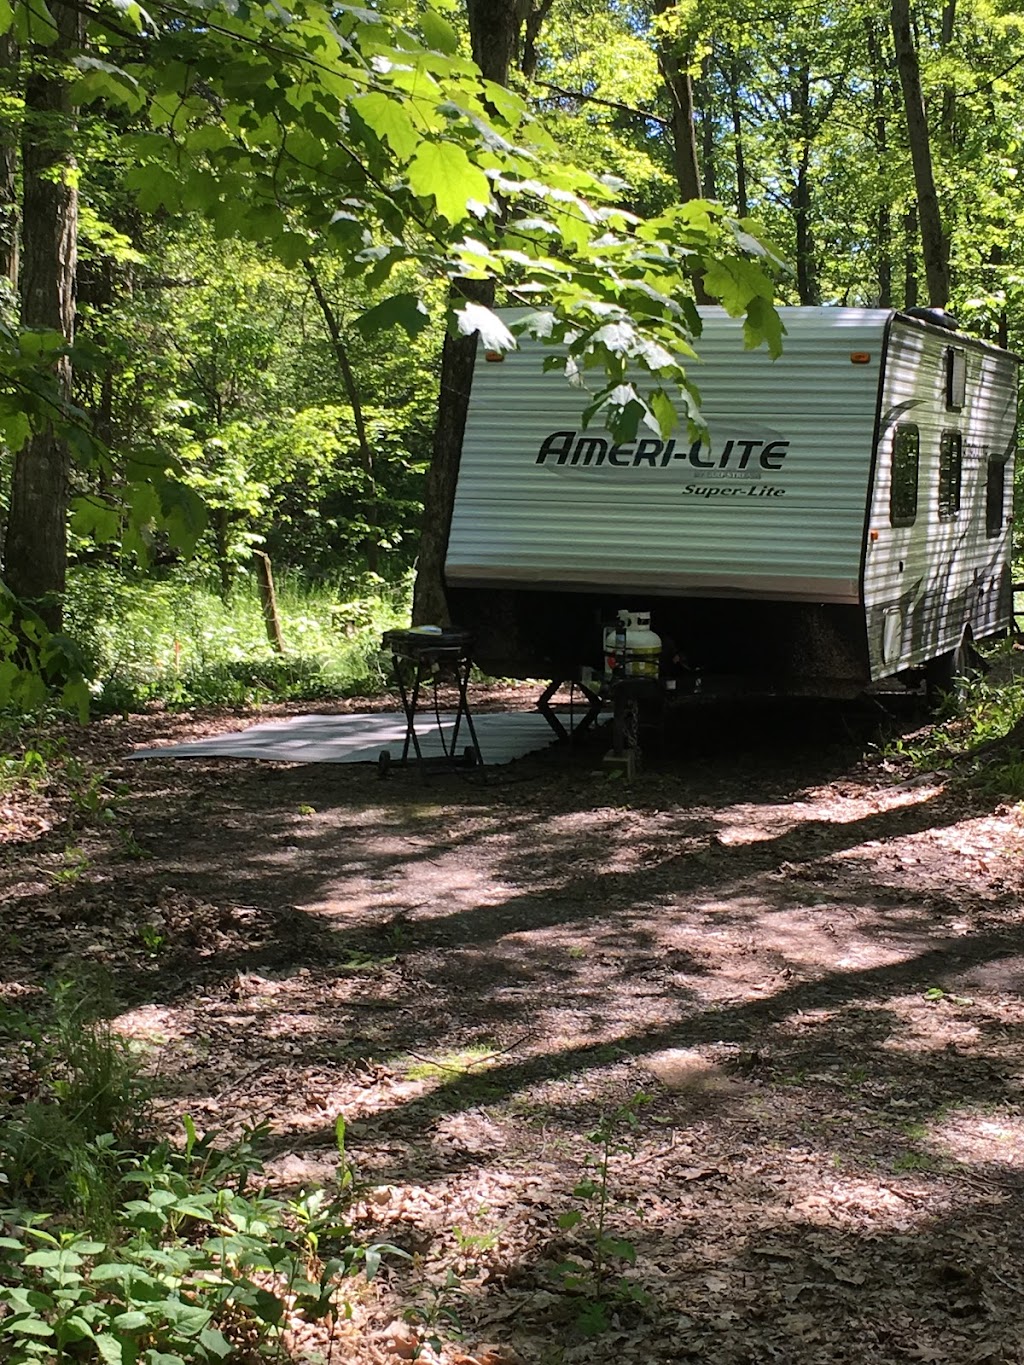 Cottages on Wheels. Camping Trailer Rentals. | 514 Bigford Rd, Brighton, ON K0K 1H0, Canada | Phone: (613) 475-9486